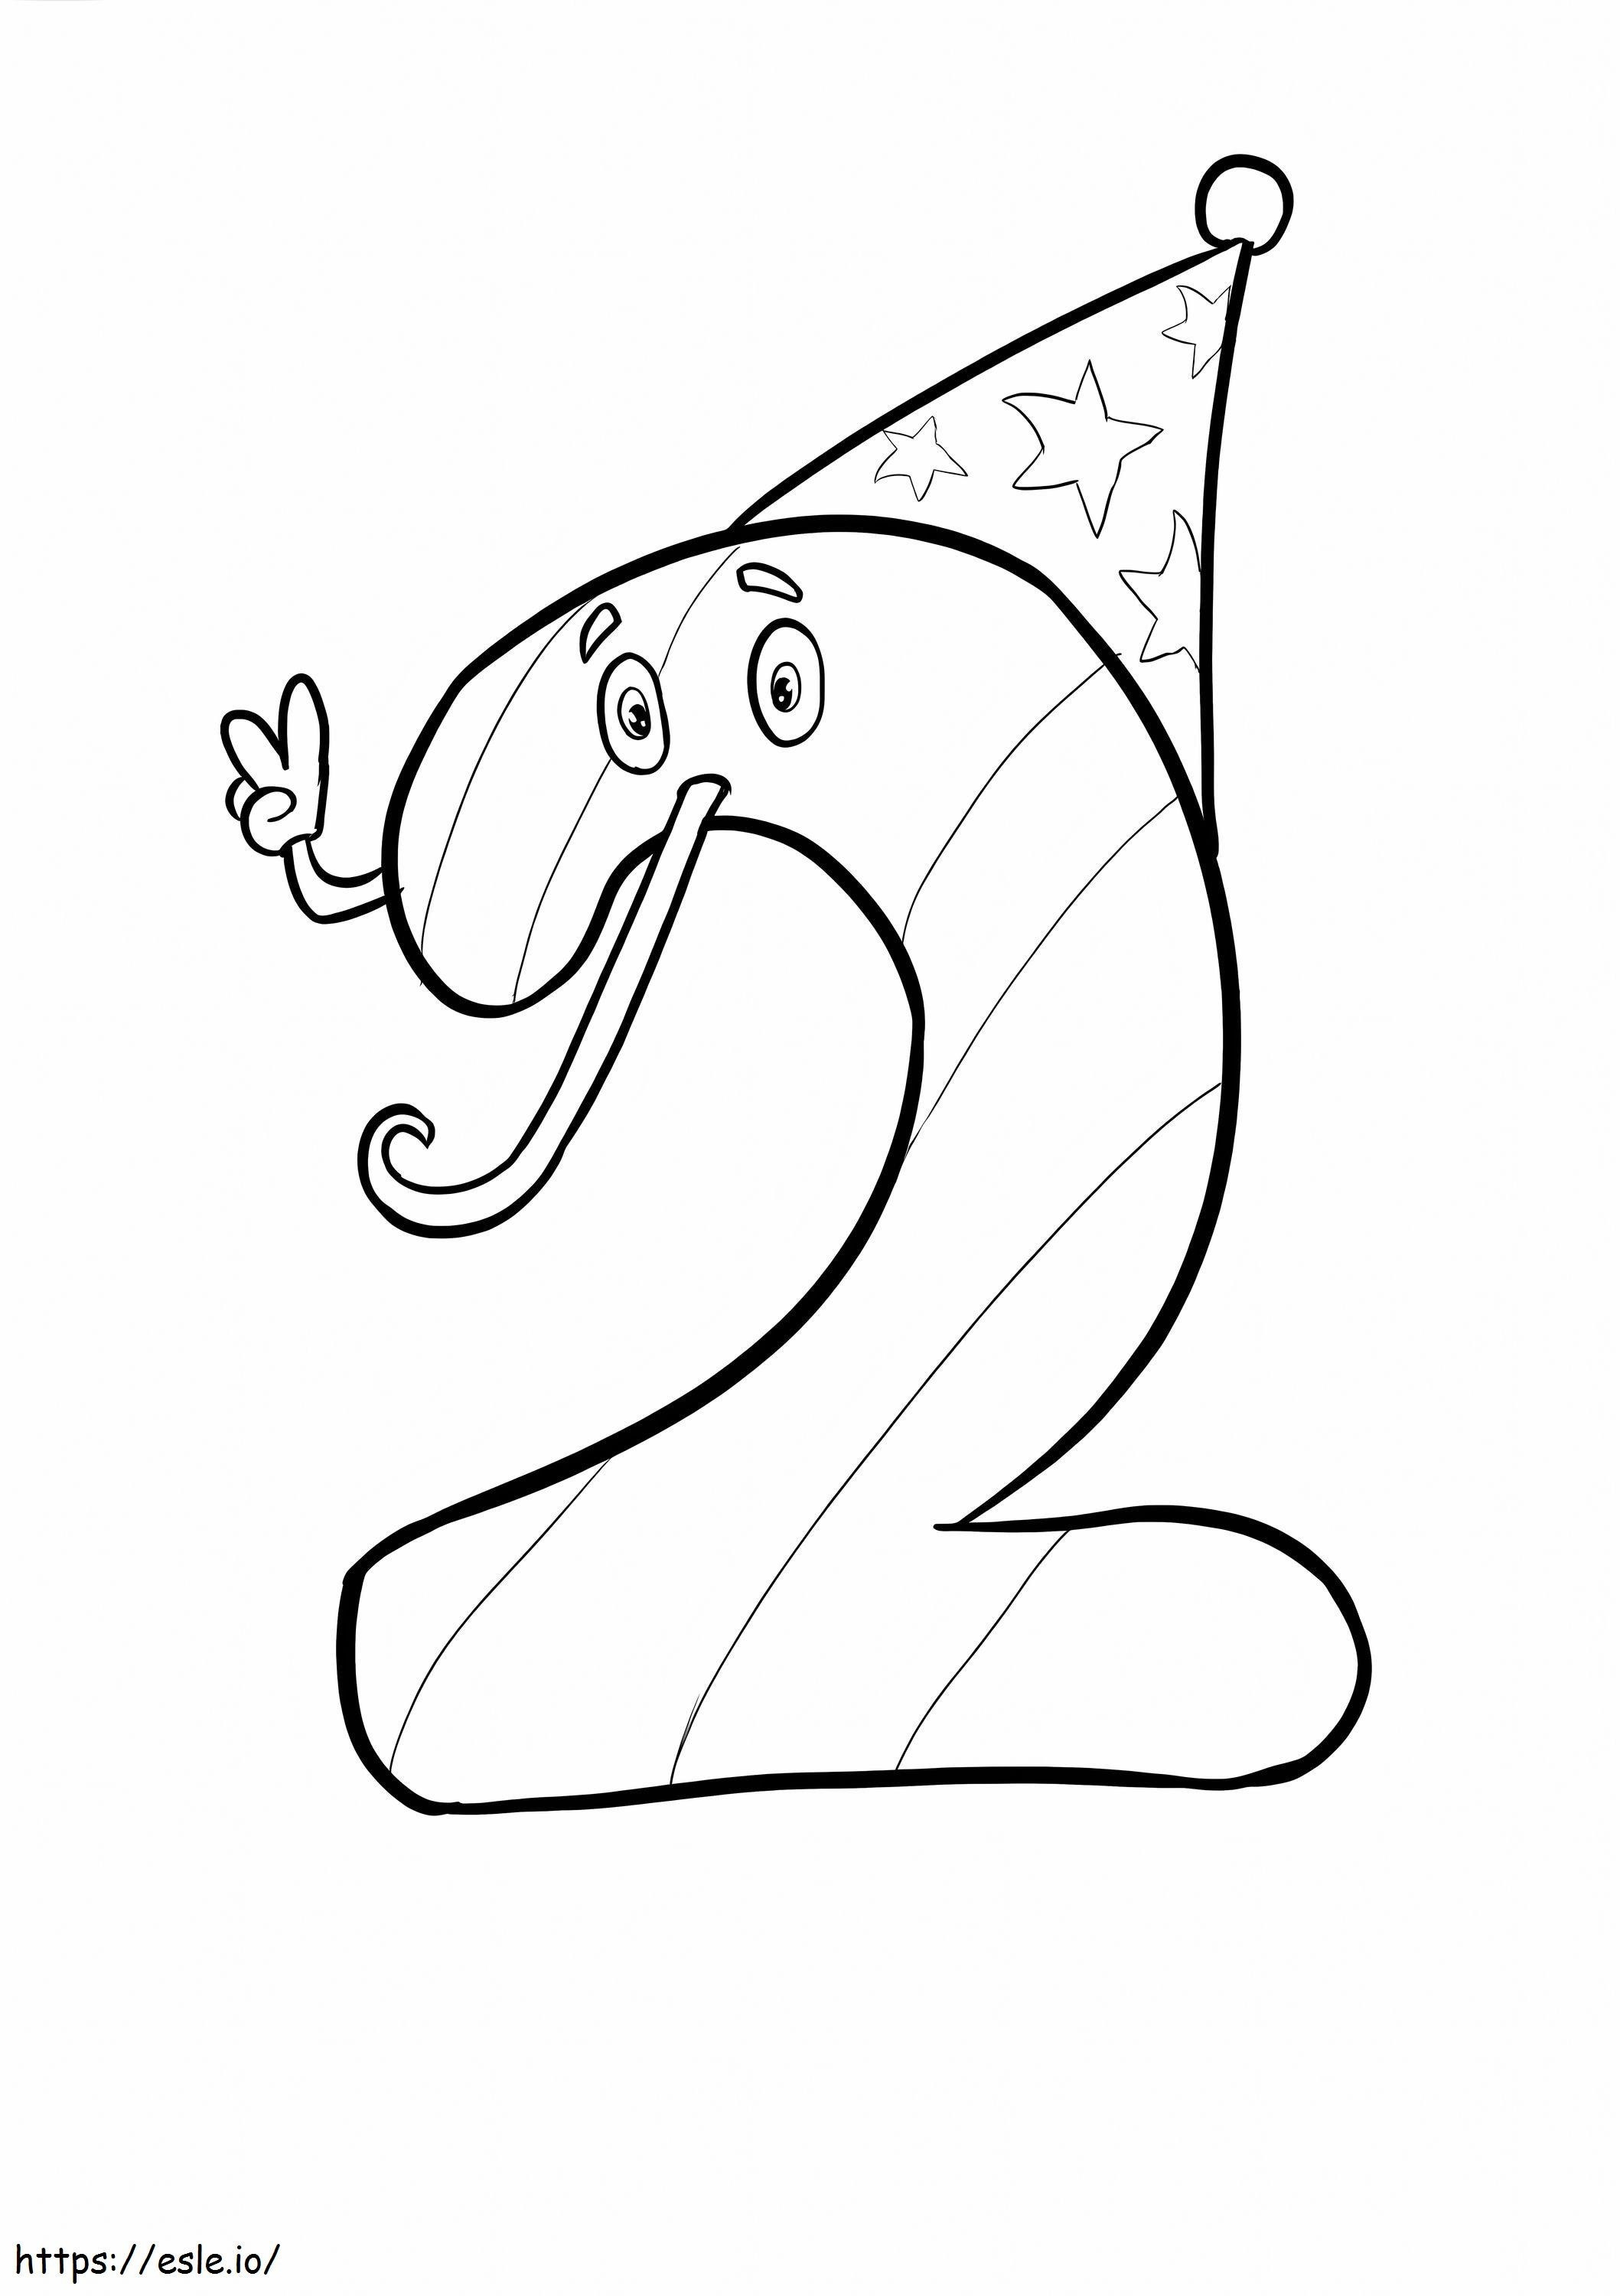 Number 2 At The Party coloring page